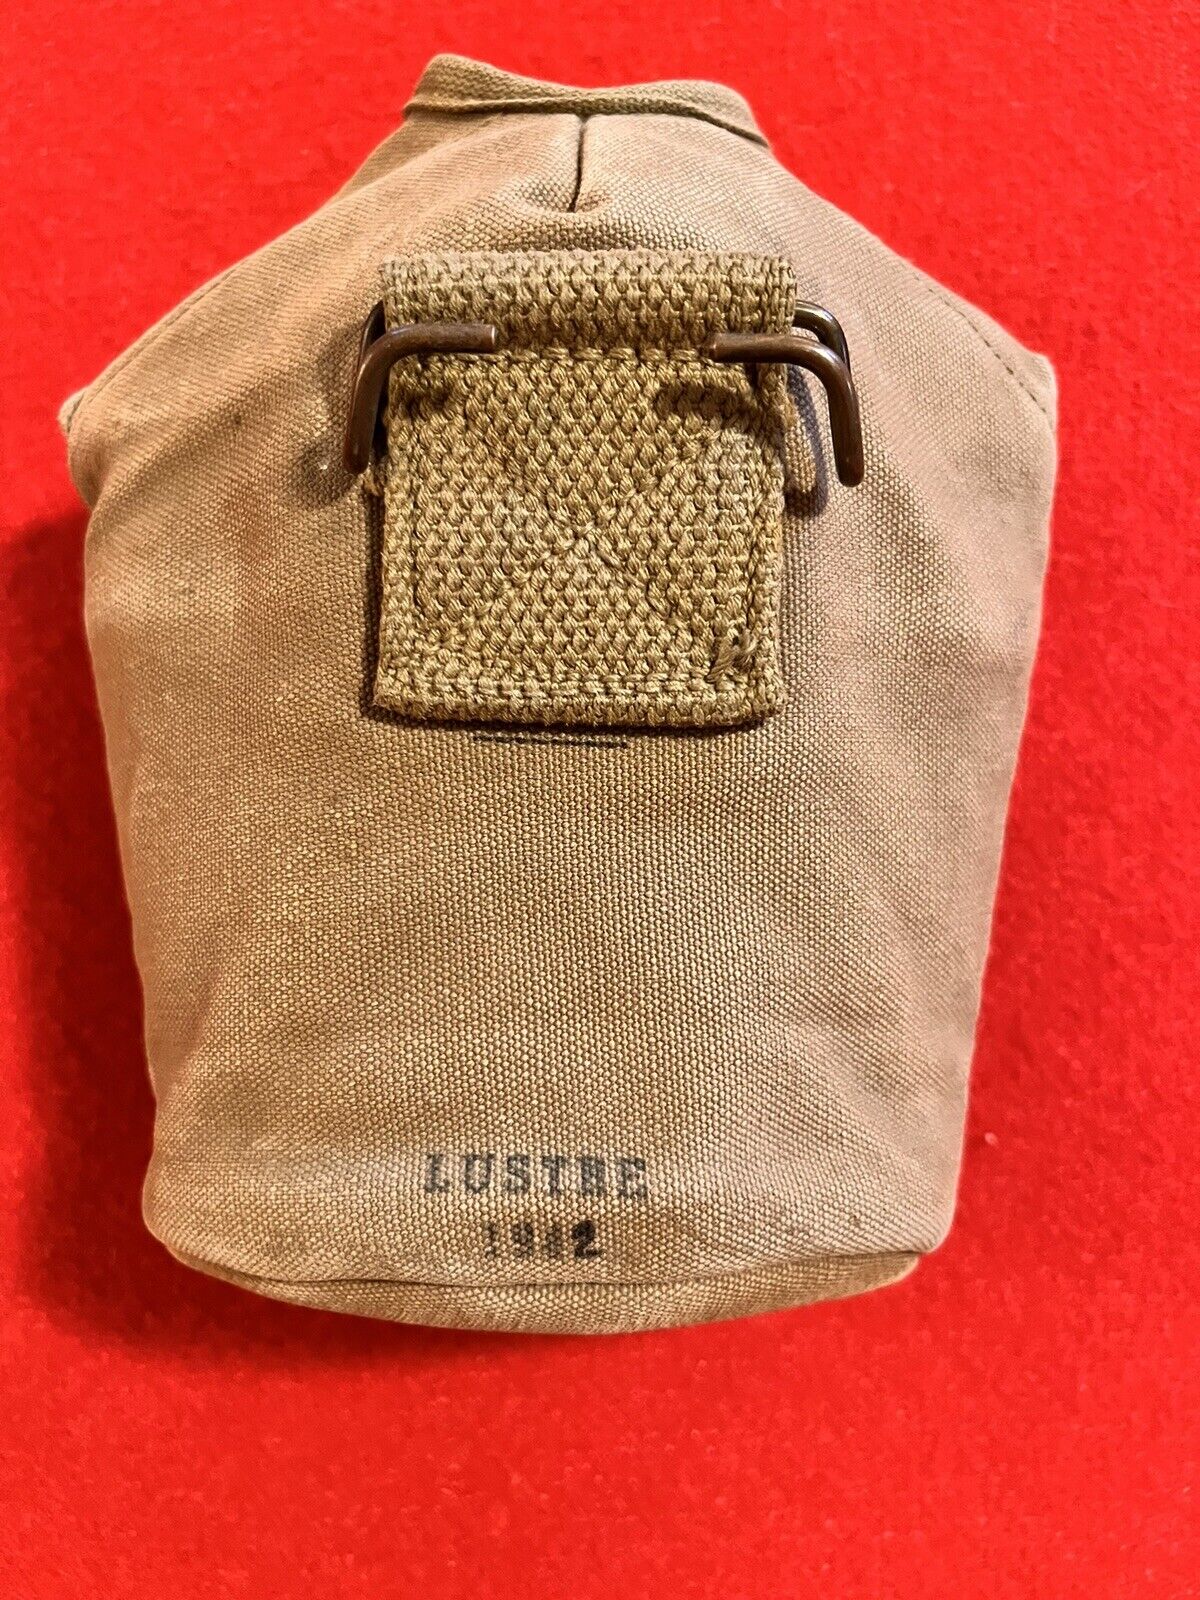 WWII Canteen Cover (“LUSTRE 142”) Scarce maker